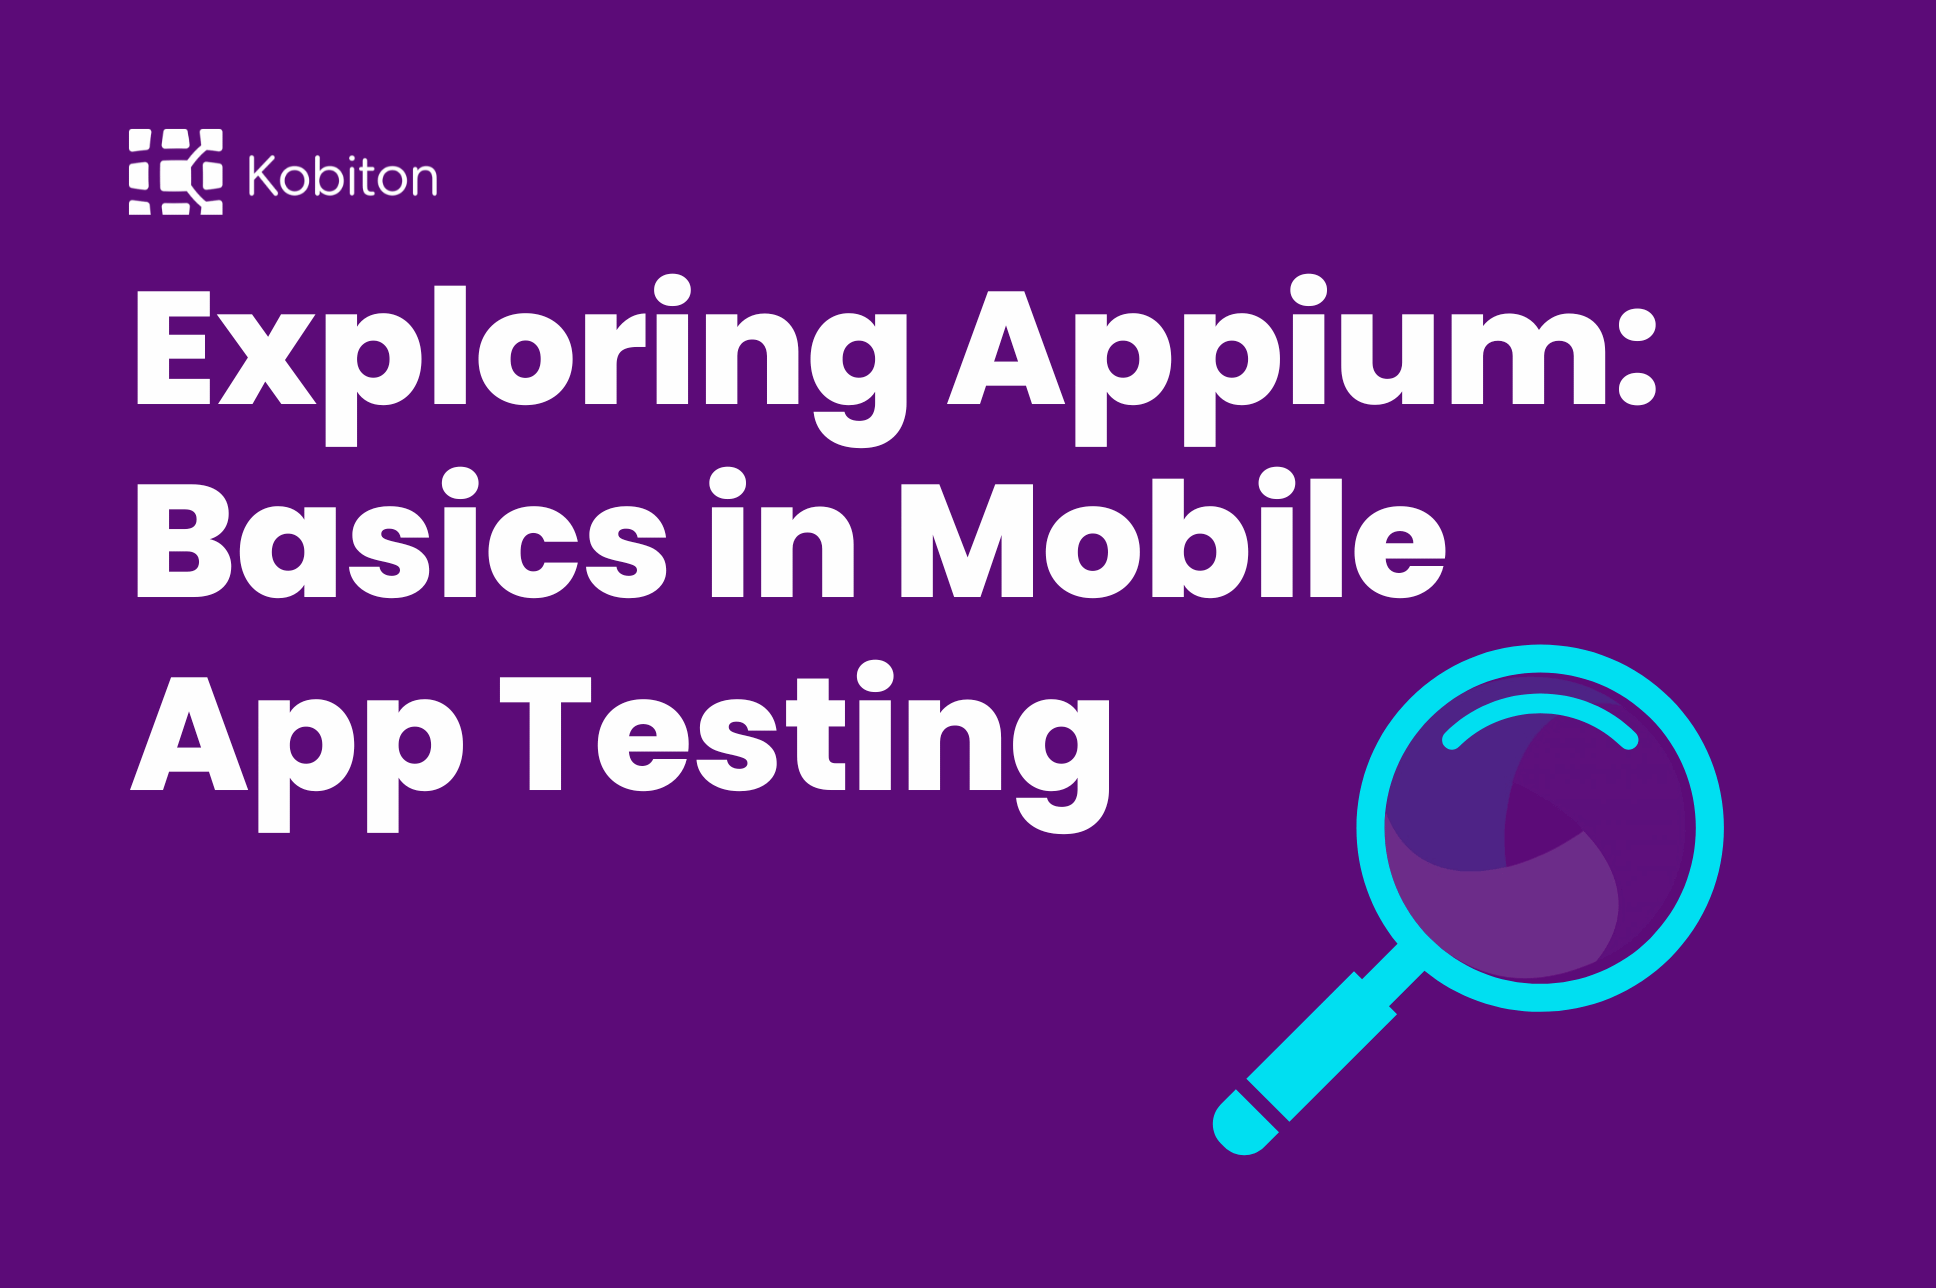 What is appium